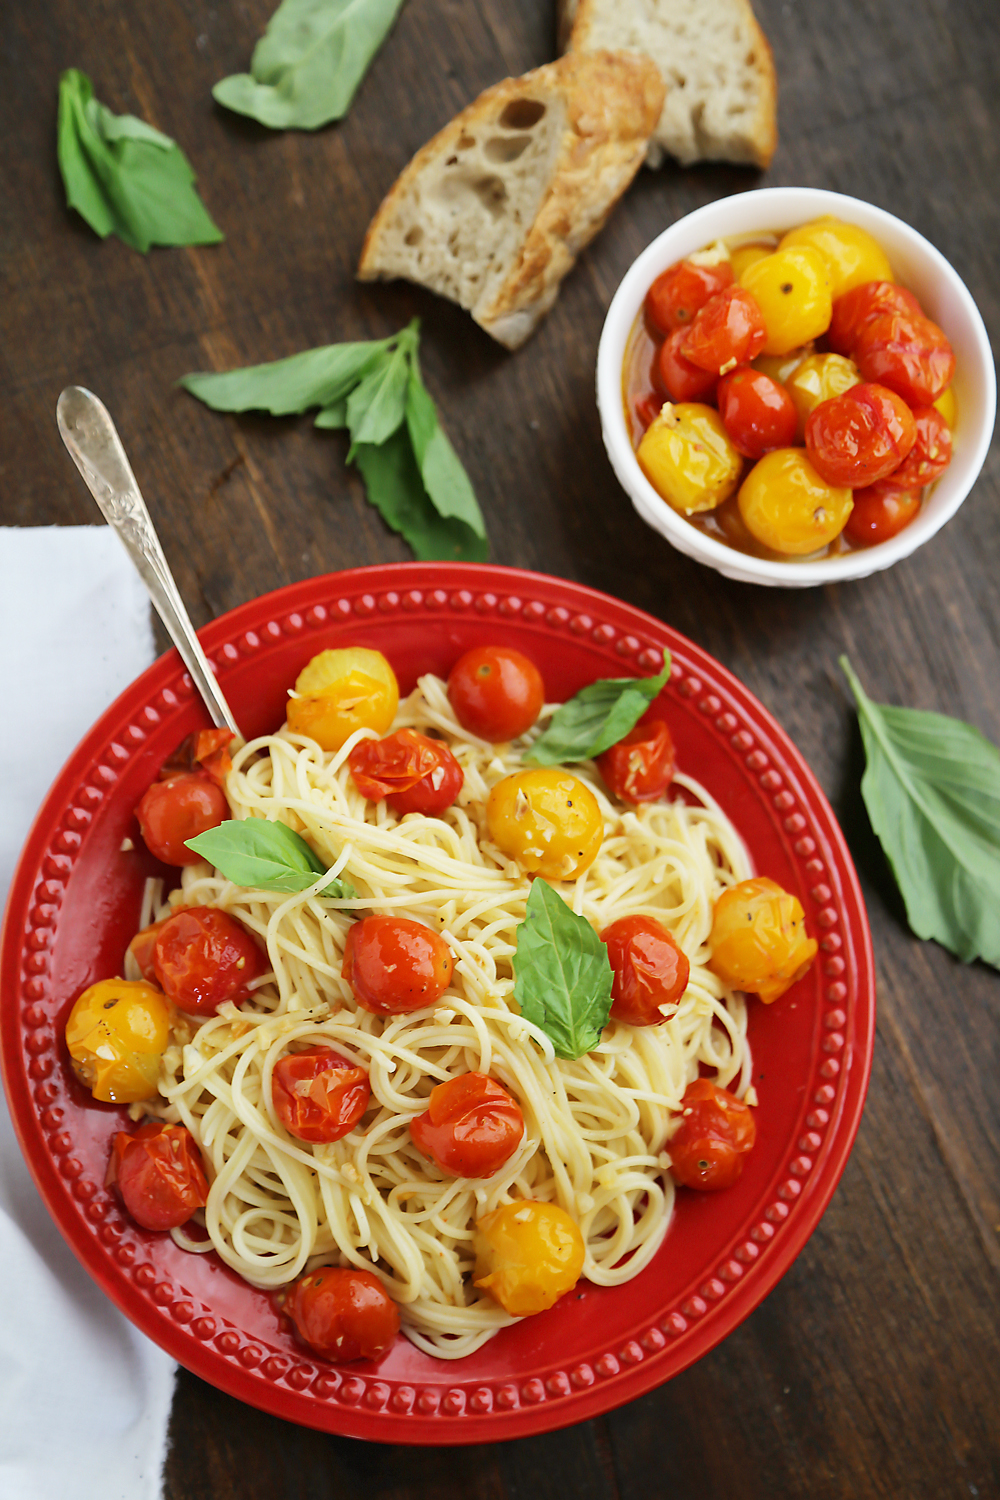 Garlic Roasted Cherry Tomatoes - Stir into pasta or rice, serve on crostini, mix into a frittata, use as a pizza topping, spread on sandwiches, purée into a sauce, or keep them canned up to 2 weeks. Endless possibilities for one perfect-every-time recipe! Thecomfortofcooking.com